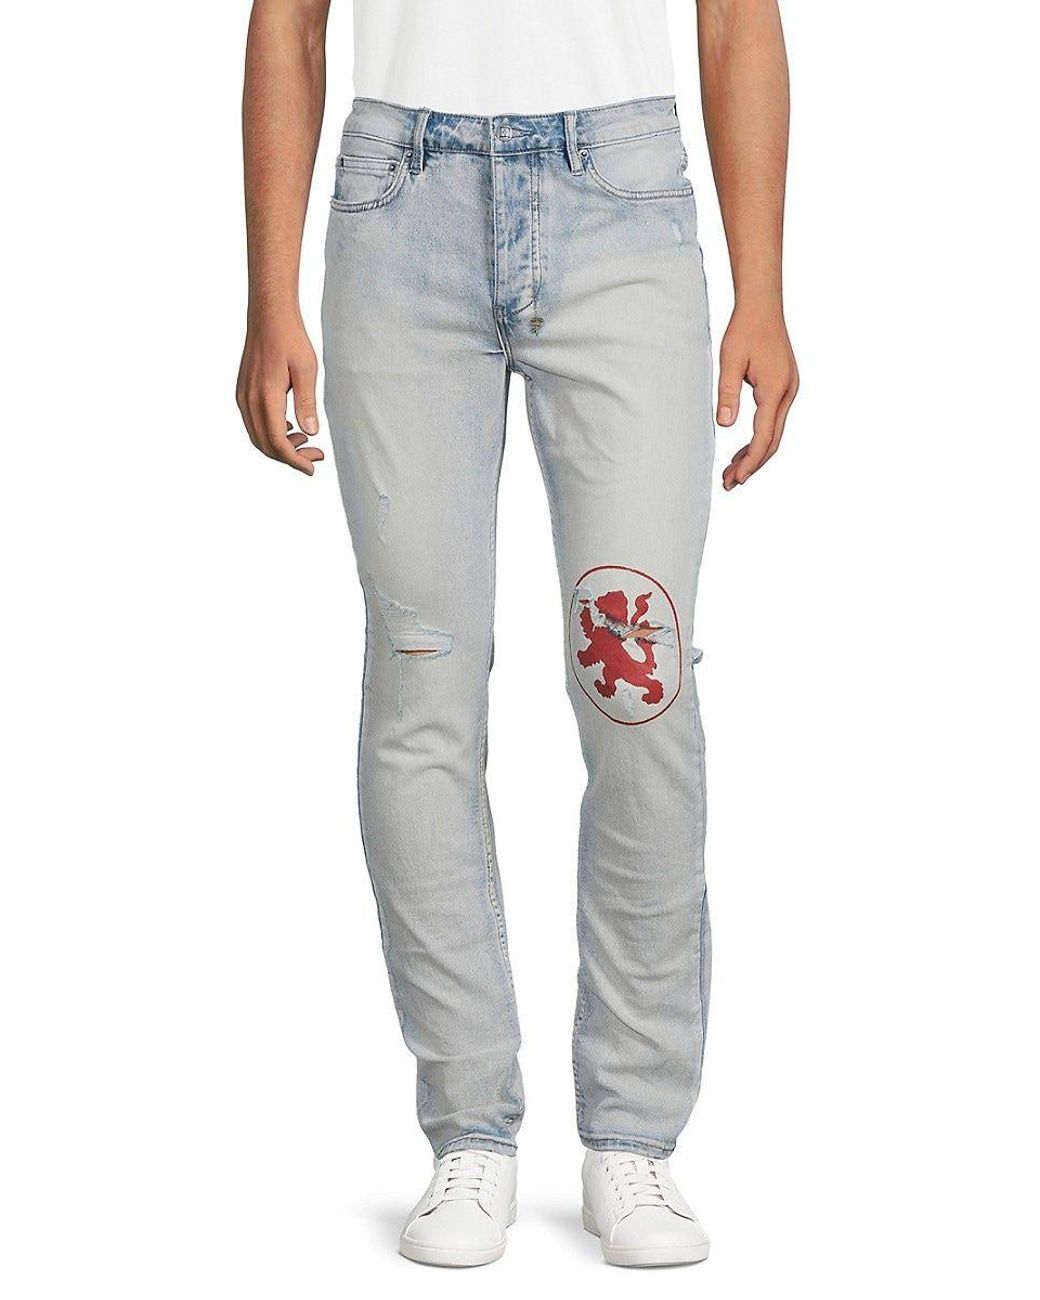 Ksubi Chitch Lion Slim Tapered Fit Distressed Jeans in Gray for 